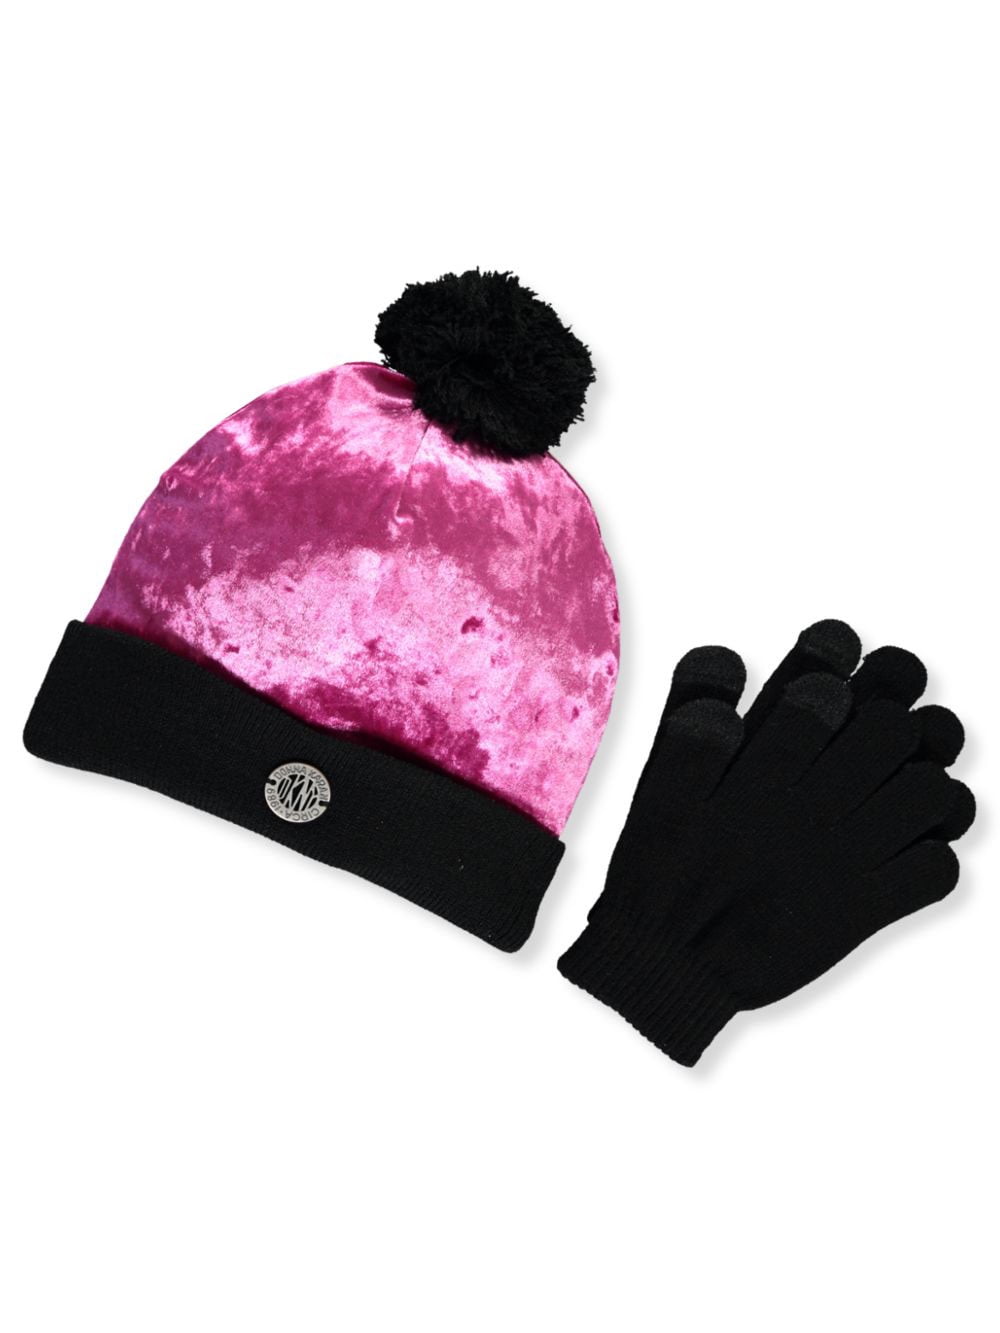 DKNY Girls Beanie Hat and Gloves Set 